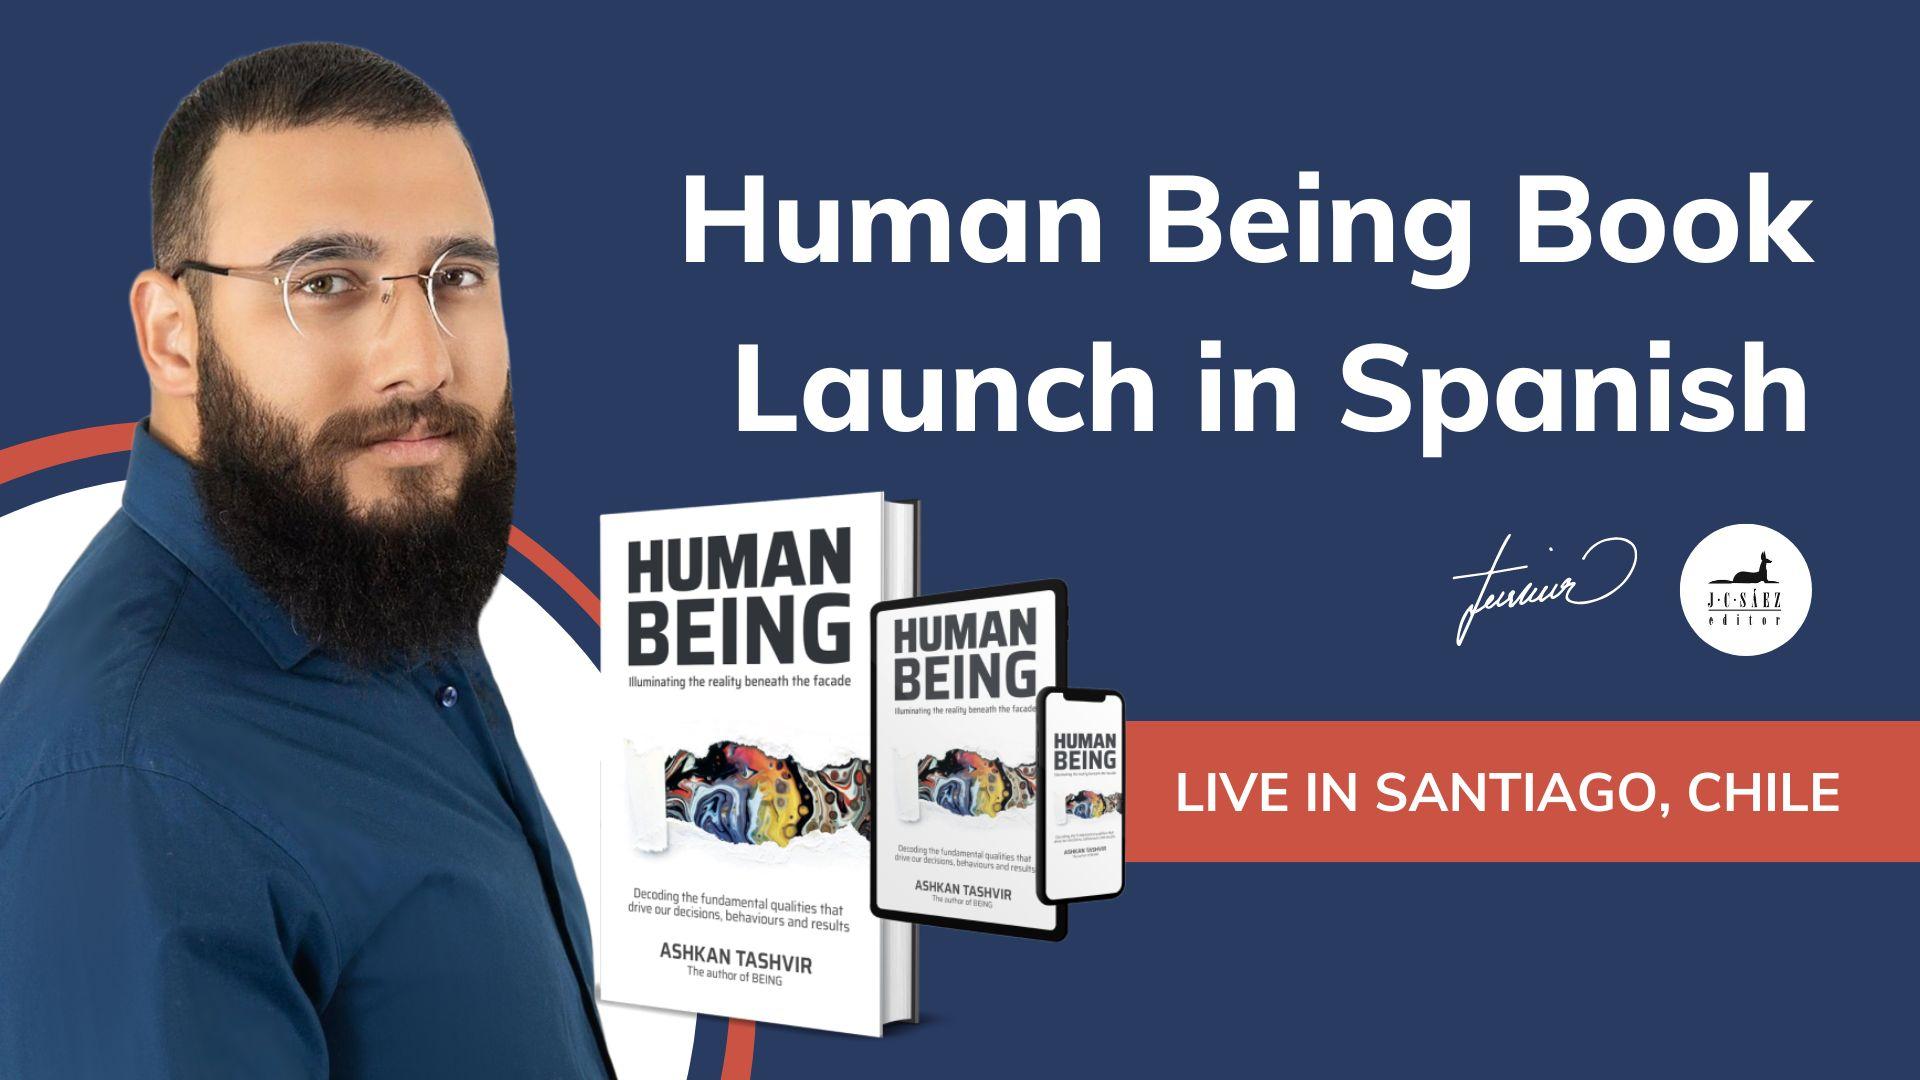 Human Being Book Launch in Spanish